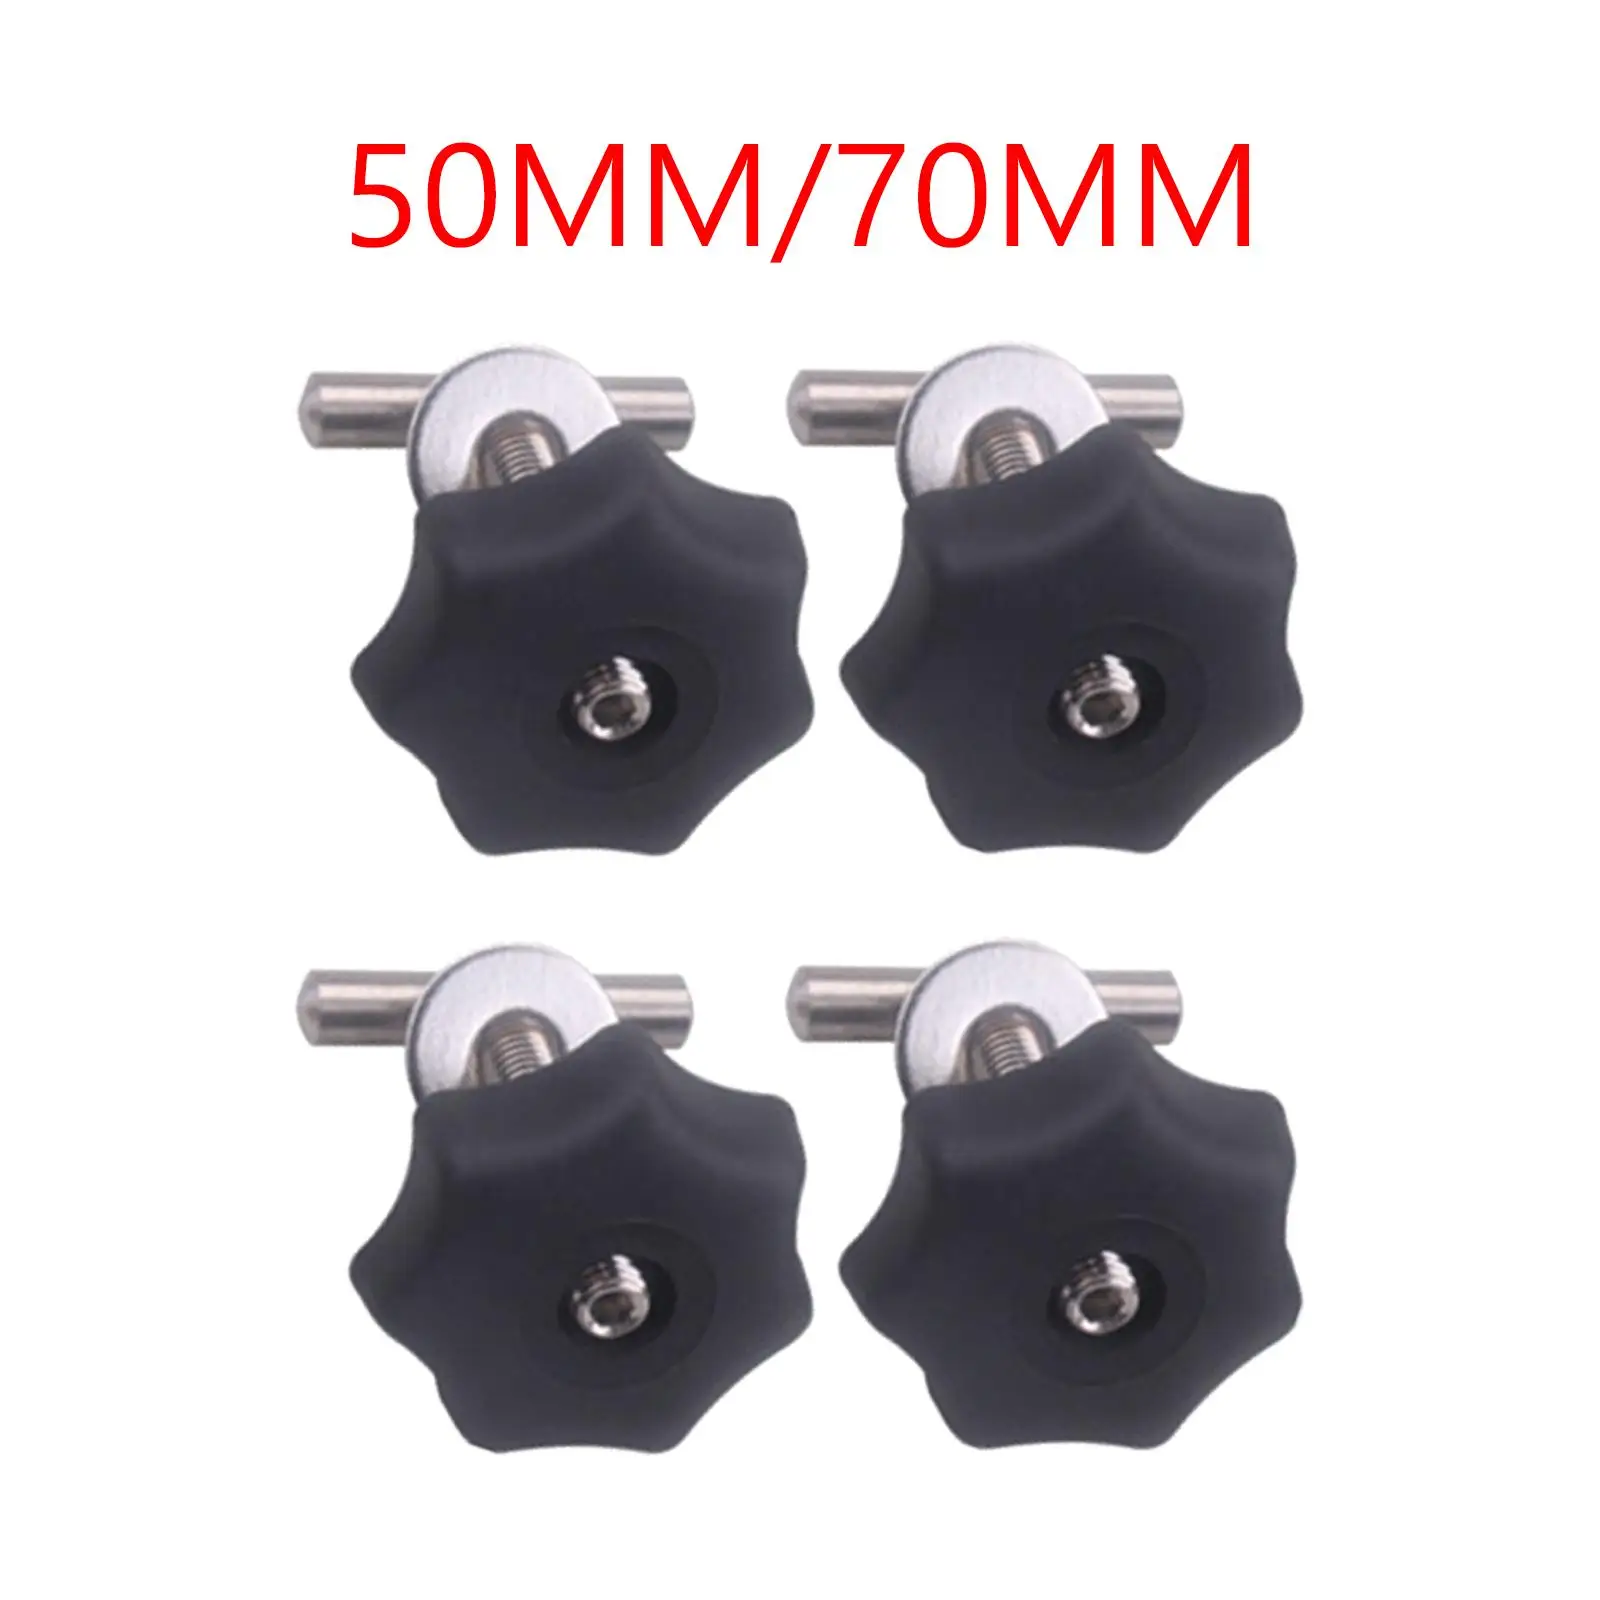 4 Pieces Fixing Screws set Mounting Accessories Accessories Vehicle Parts Bolt Set 50mm/70mm for VW T5 T6 Assembly Repair